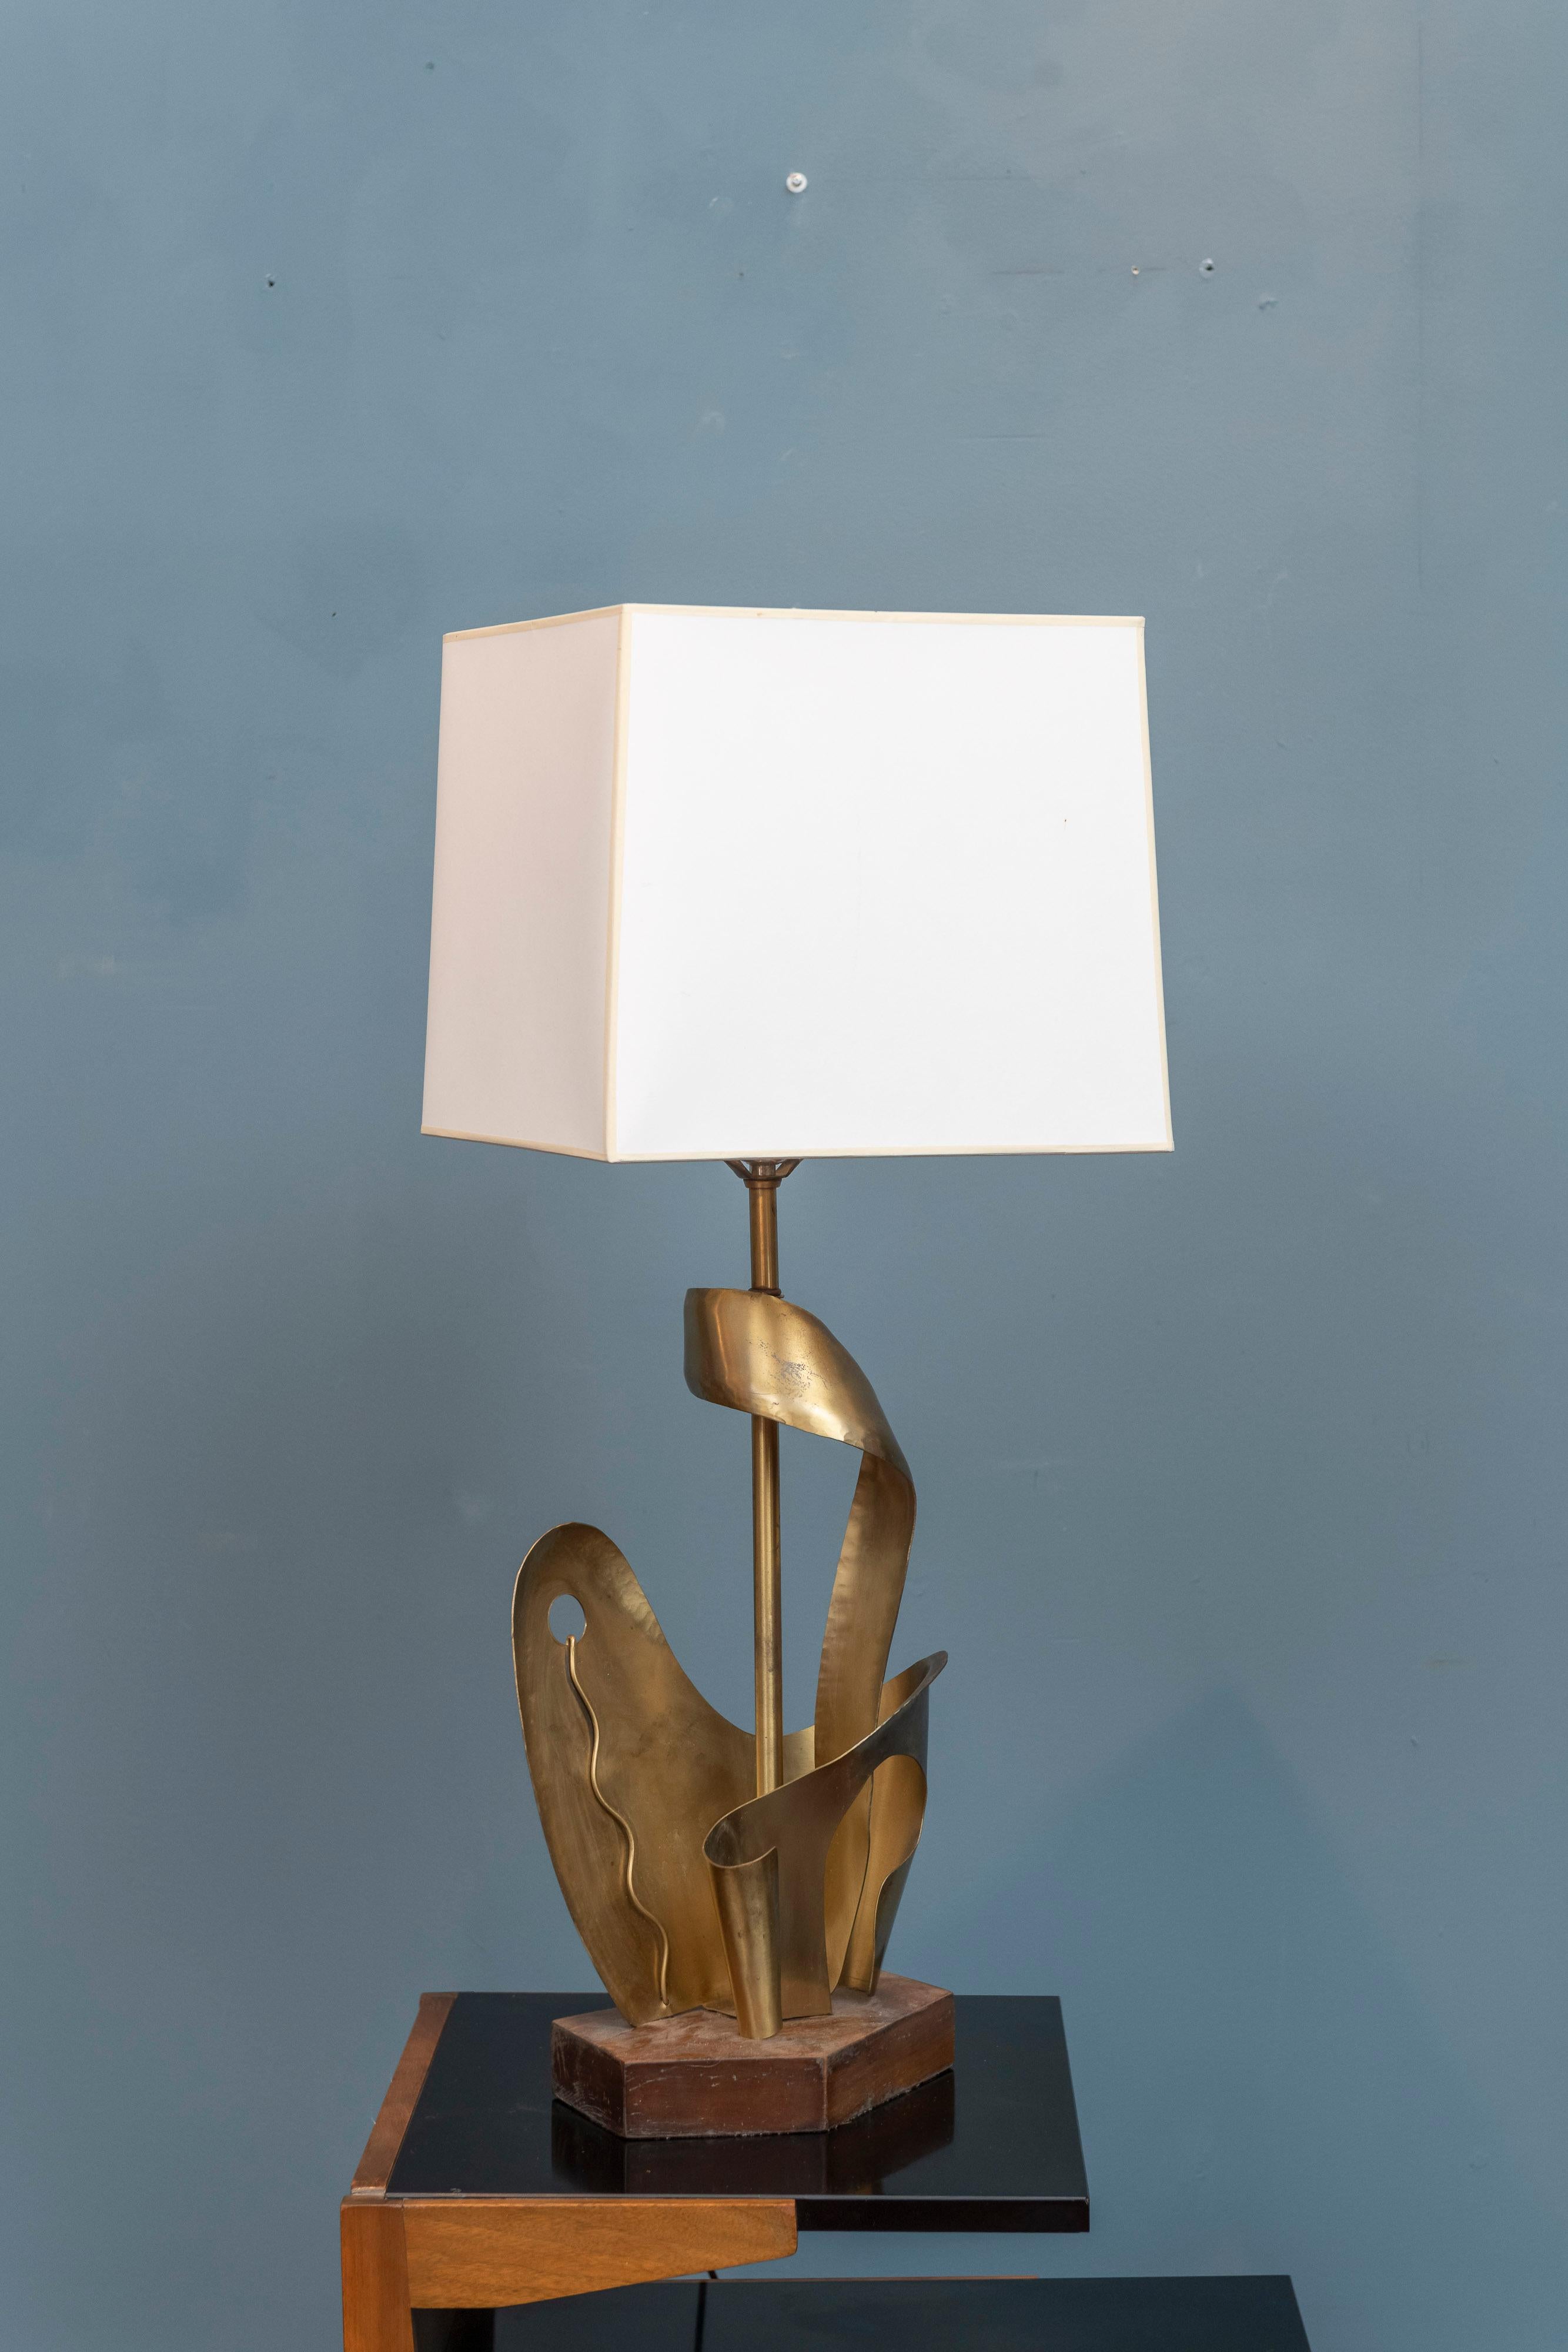 Yasha Heifetz design table lamp, U.S.A. Abstract hammered brass sculpture body on an asymmetrical wood base. Well executed with a skilled eye and craftsmanship, signed base and a documented model by Heifetz Lighting.